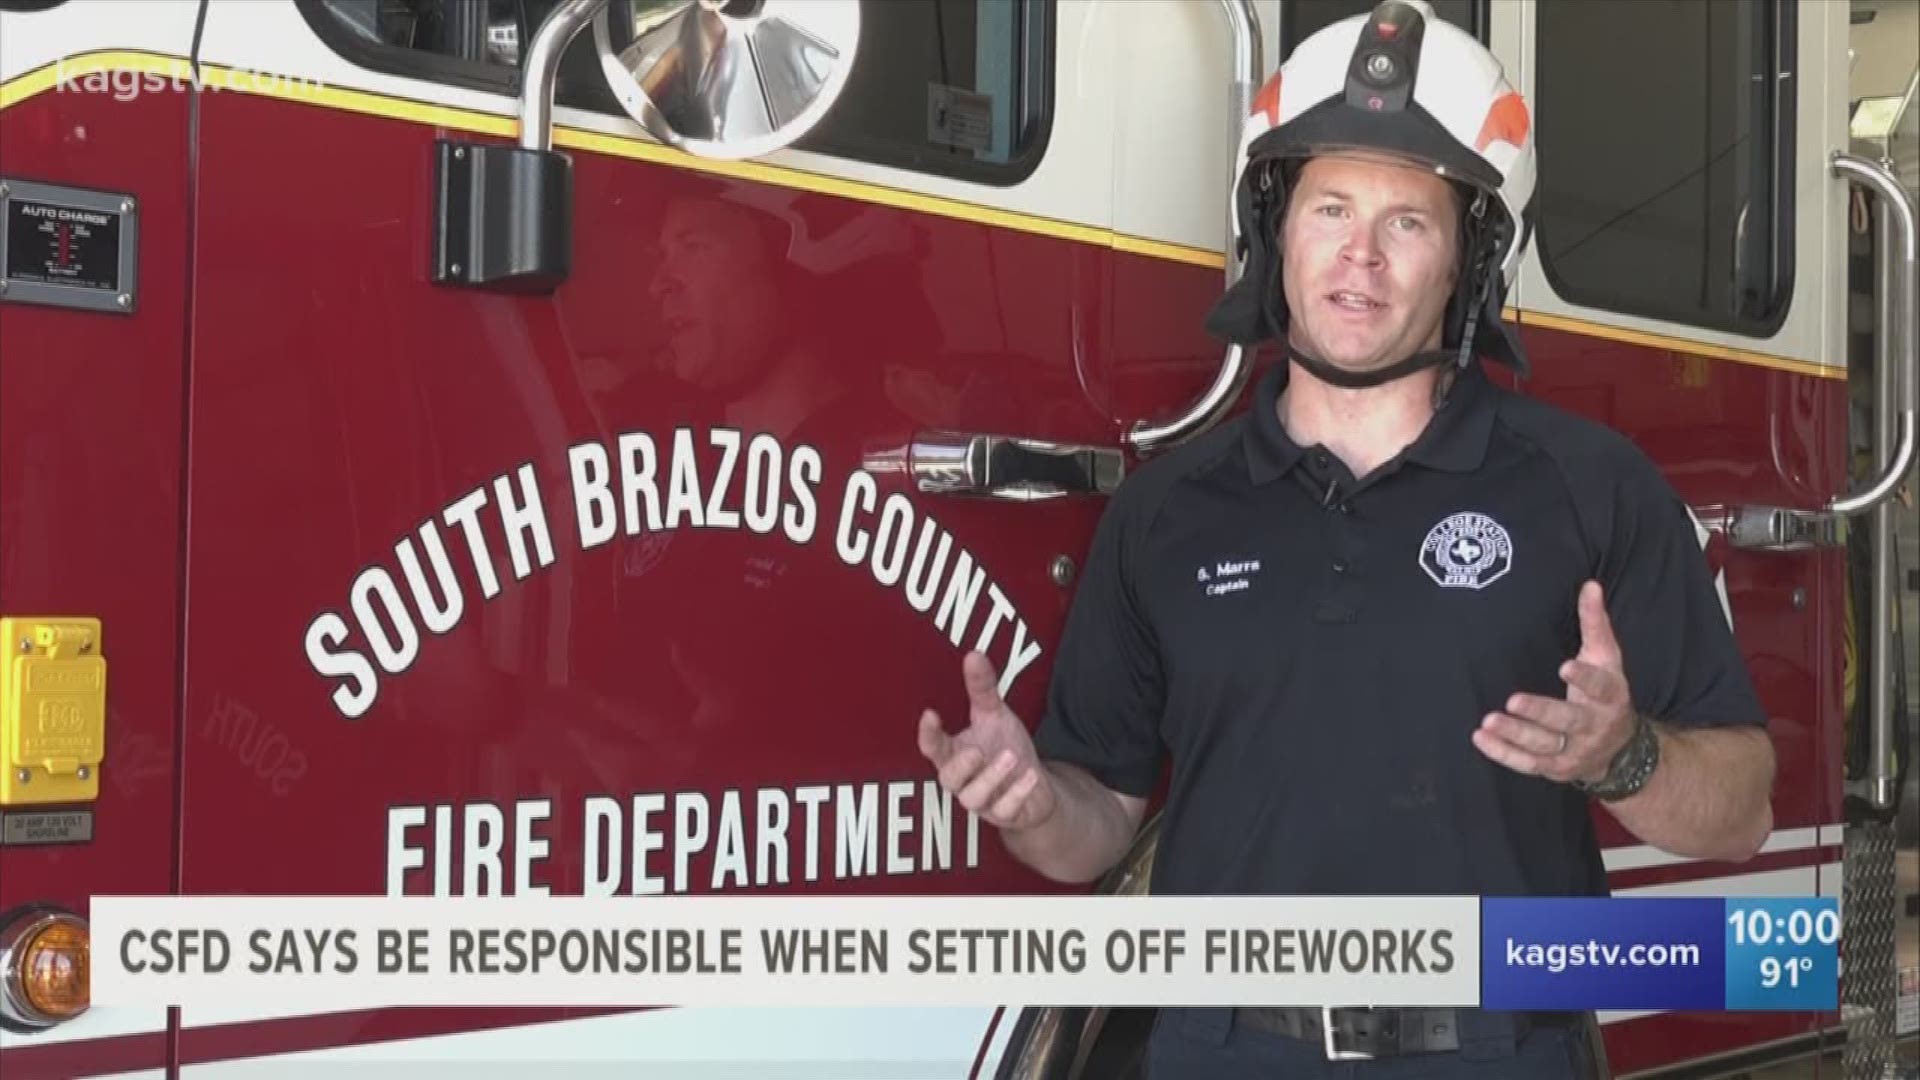 Keeping your family safe around fireworks means being responsible.